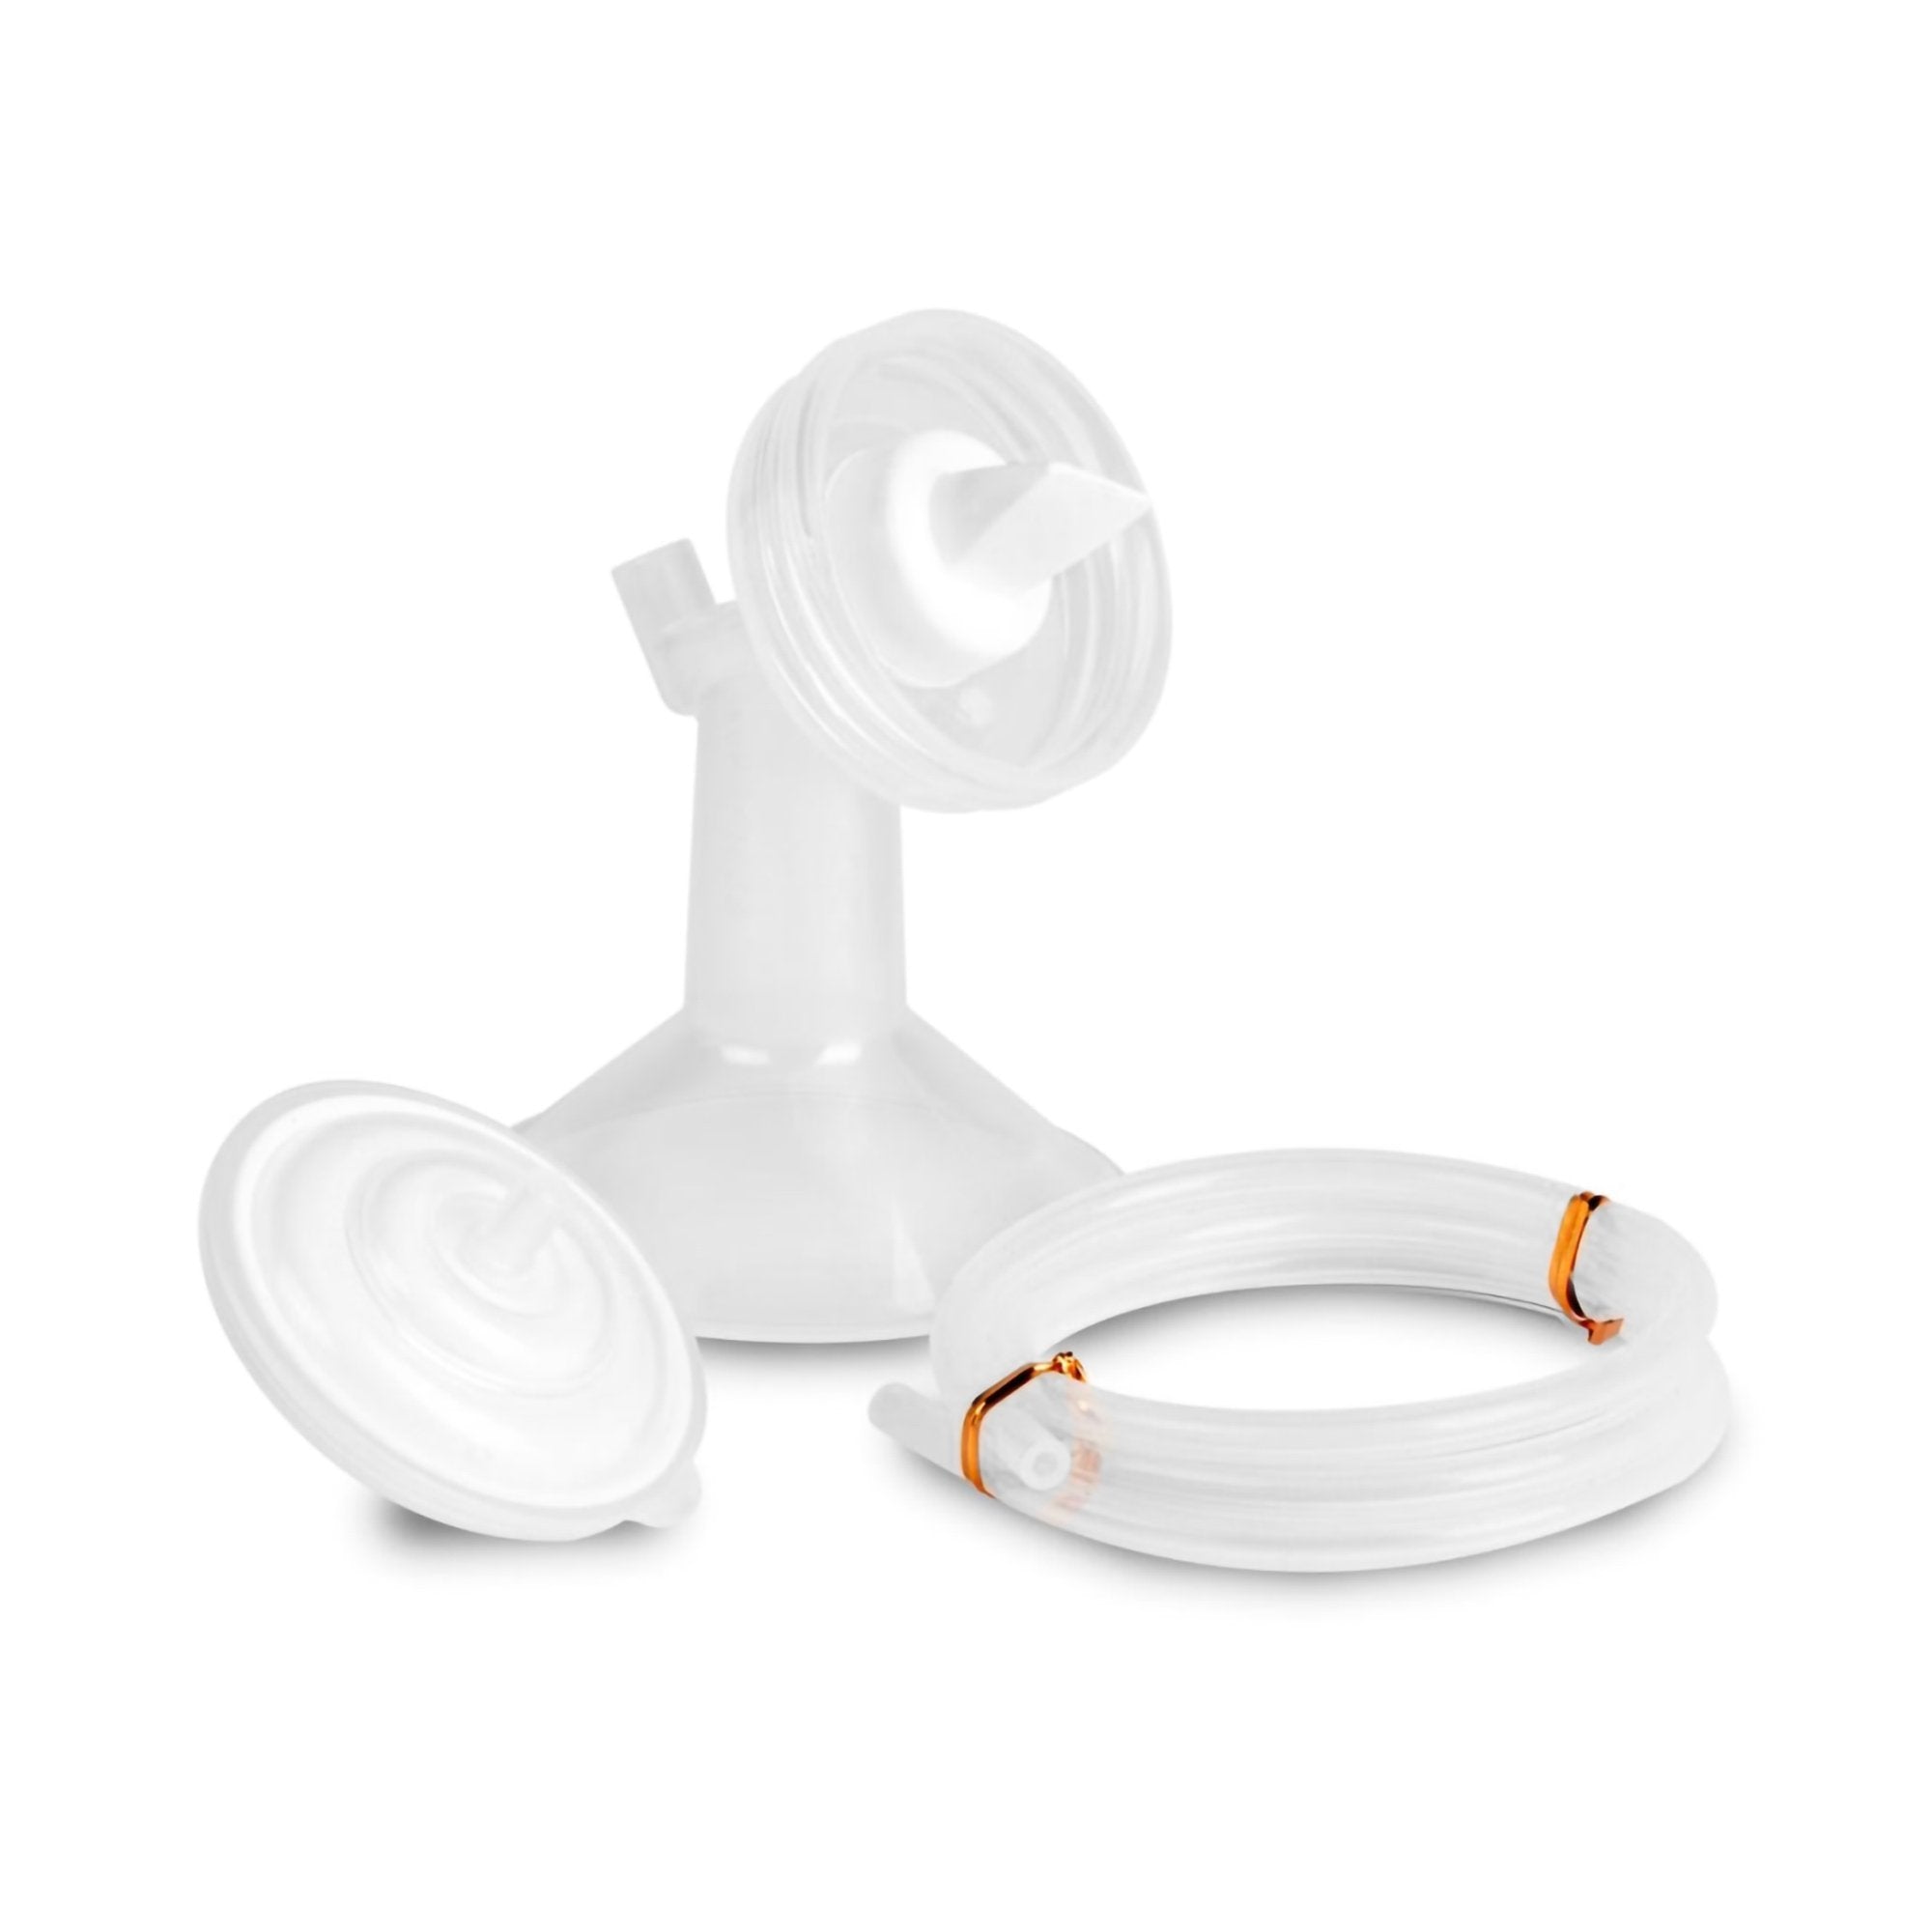 Flange Kit Spectra® For Spectra S2, S1, S9, M1 Breast Pumps